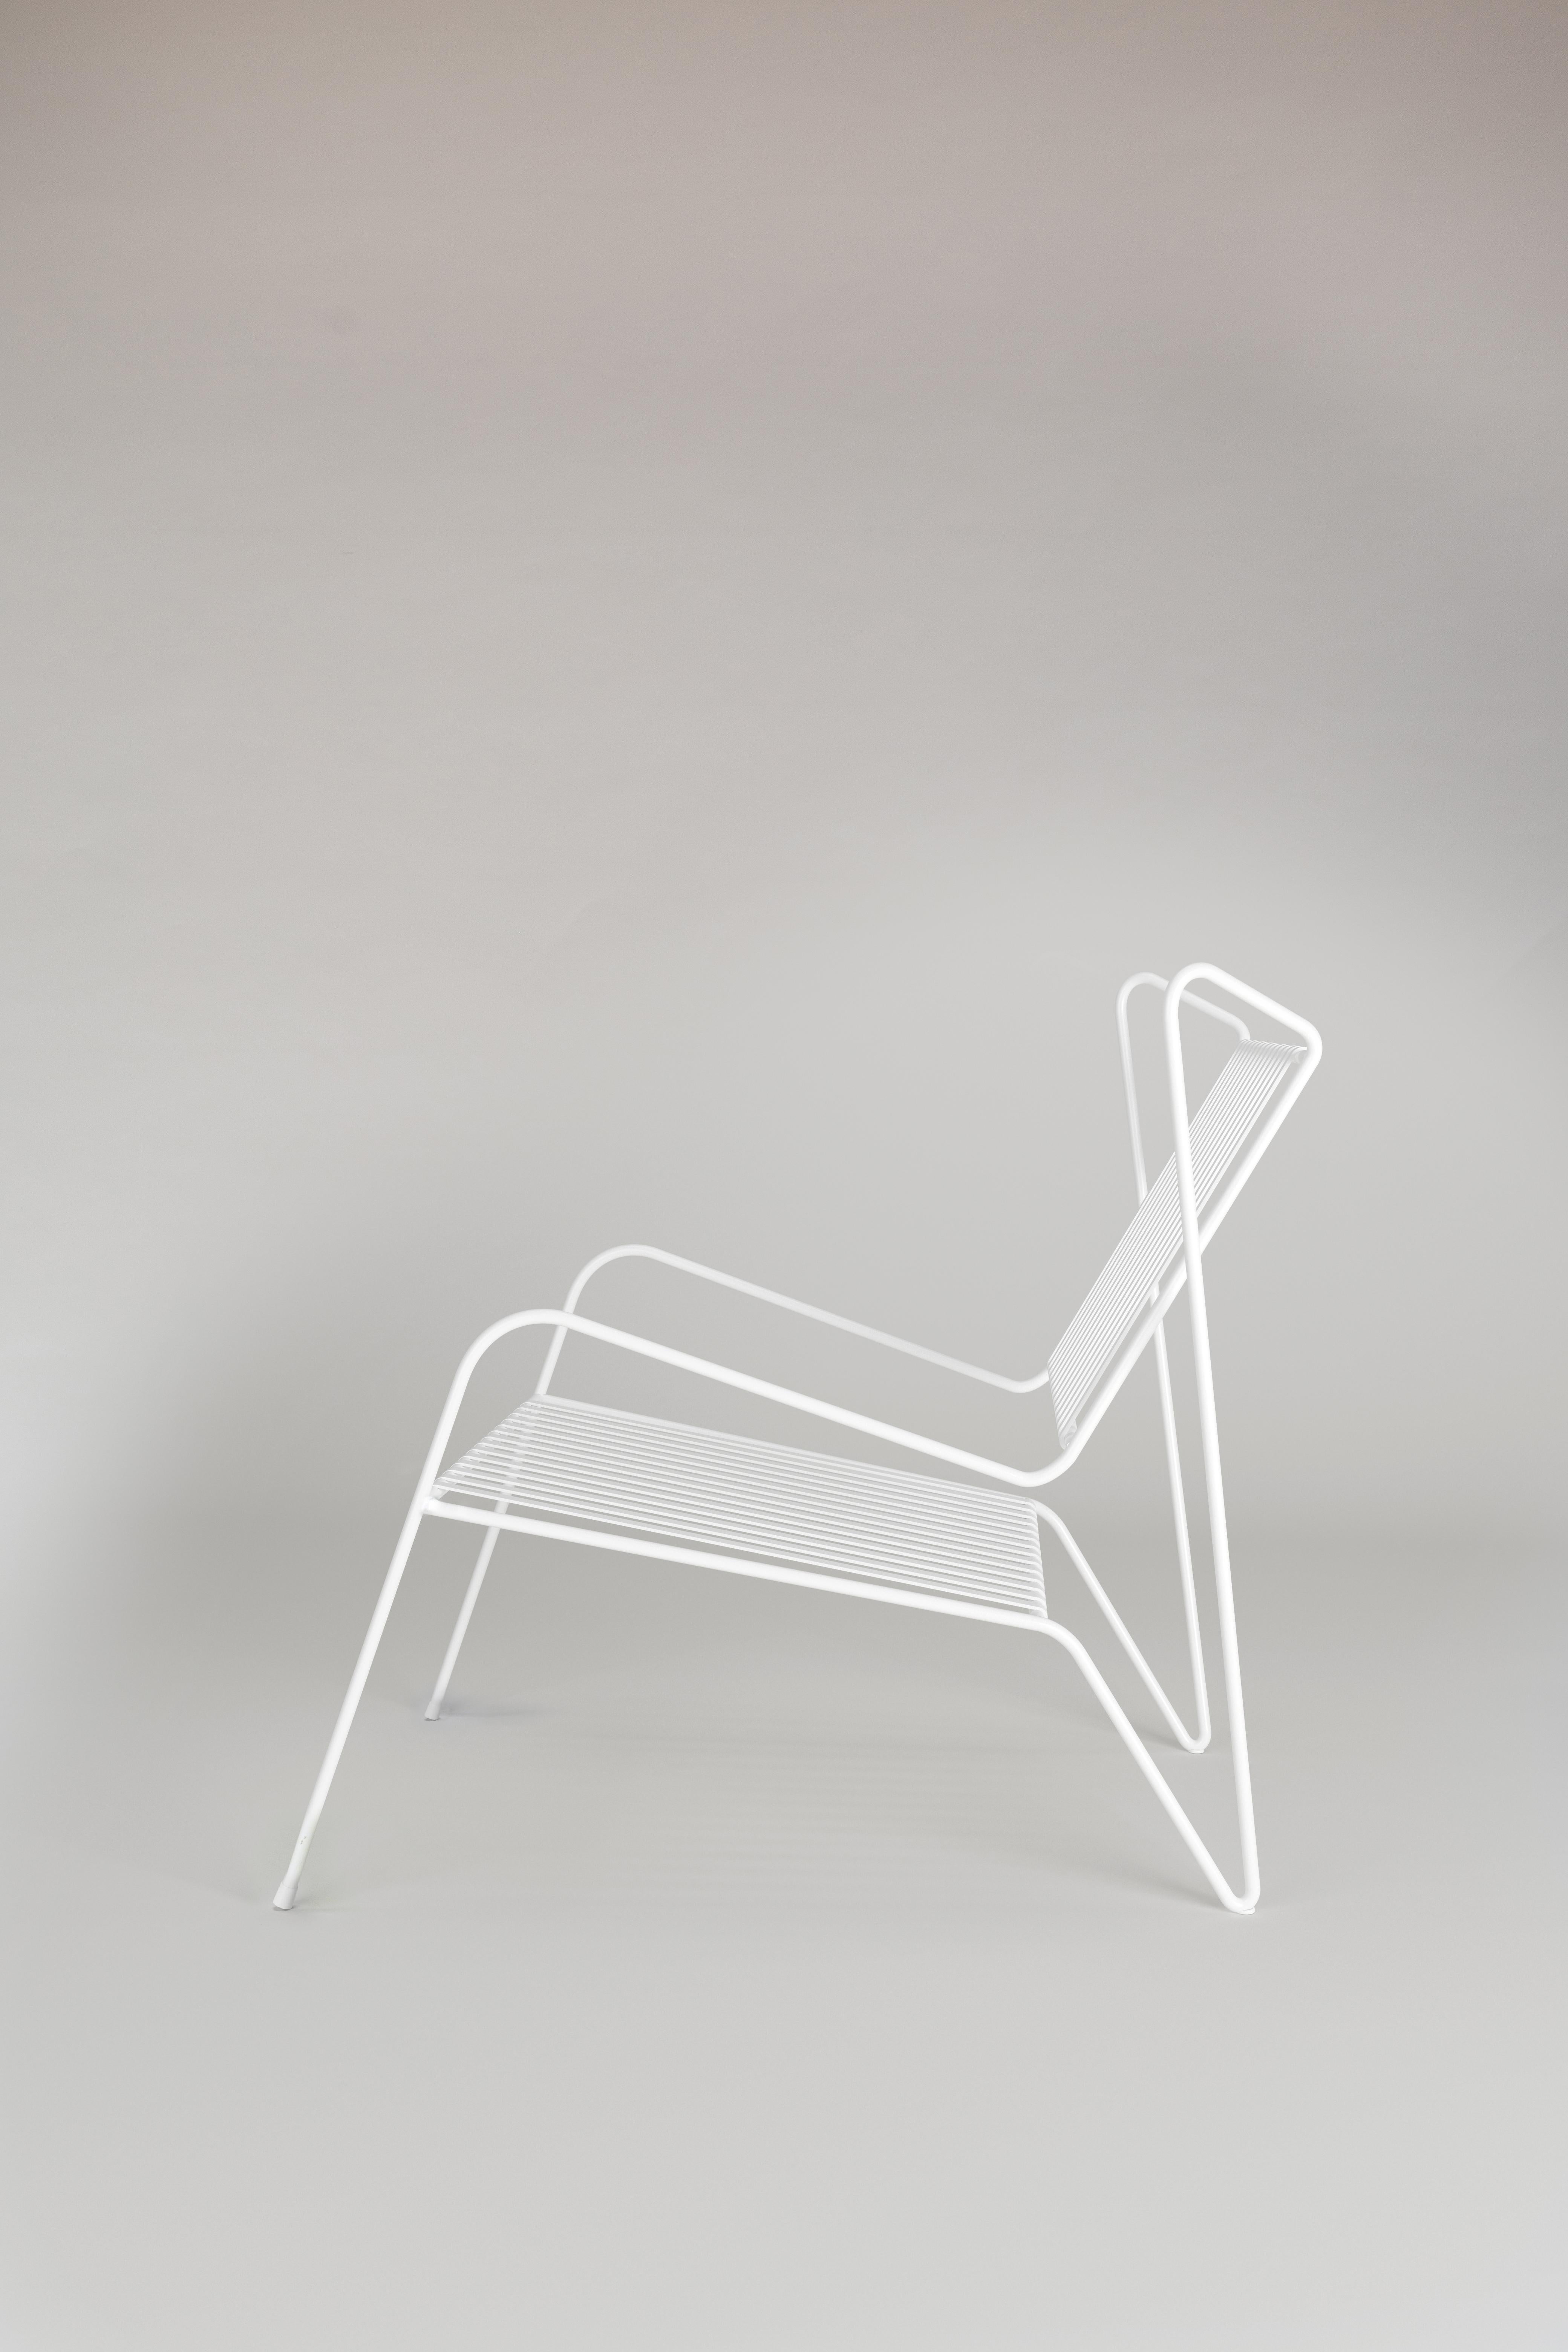 White Capri Easy Lounge chair by Cools Collection
Materials: Powder coated stainless steel.
Dimensions: W 70 x D 84 x H 78 cm (seat height 34cm).
Available in white or black finishes. 

COOLS Collection was launched in 2020 by